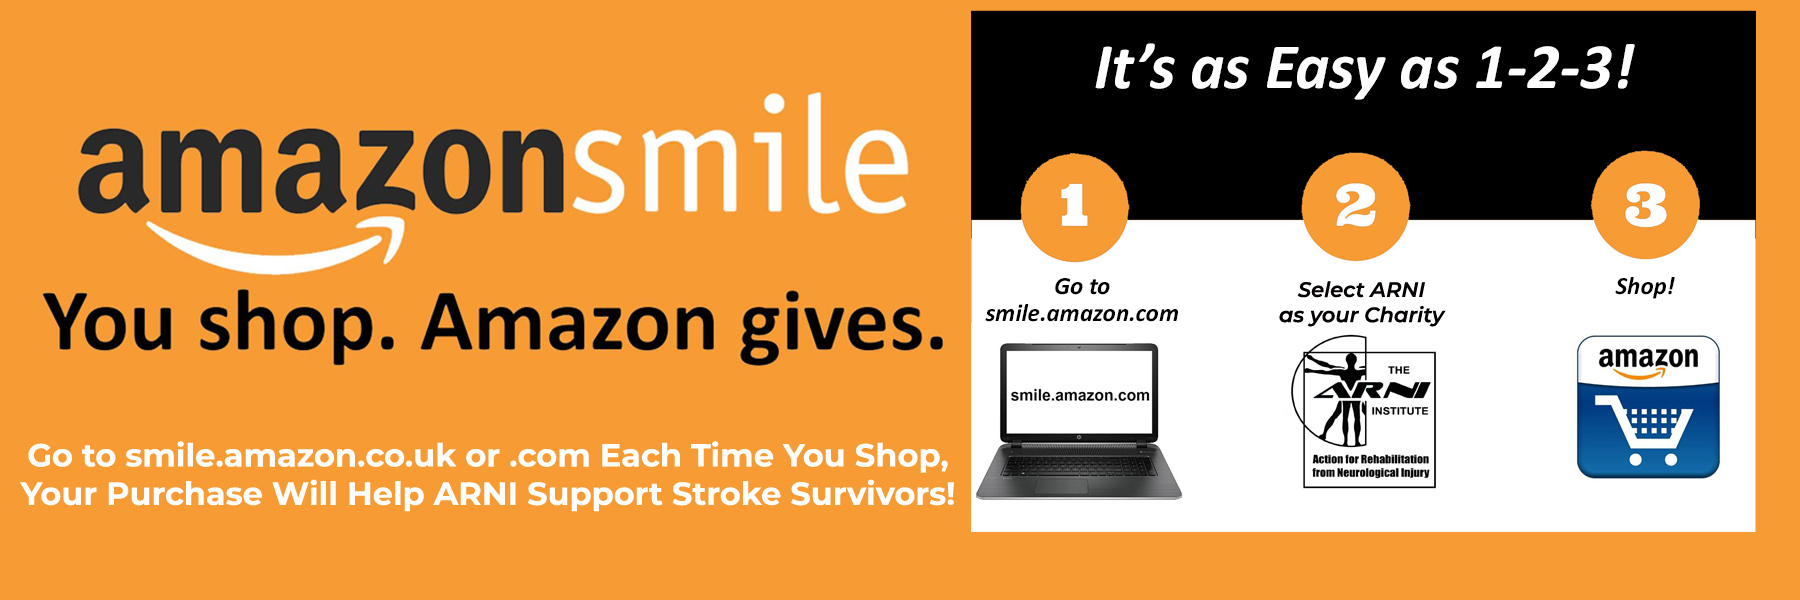 AmazonSmileHomepage2Slideshow copy - Support ARNI with Amazon Smile - Stroke Rehabilitation and Exercise Training for Survivors & Specialist Stroke Courses for Therapists and Trainers, Online and Face to Face